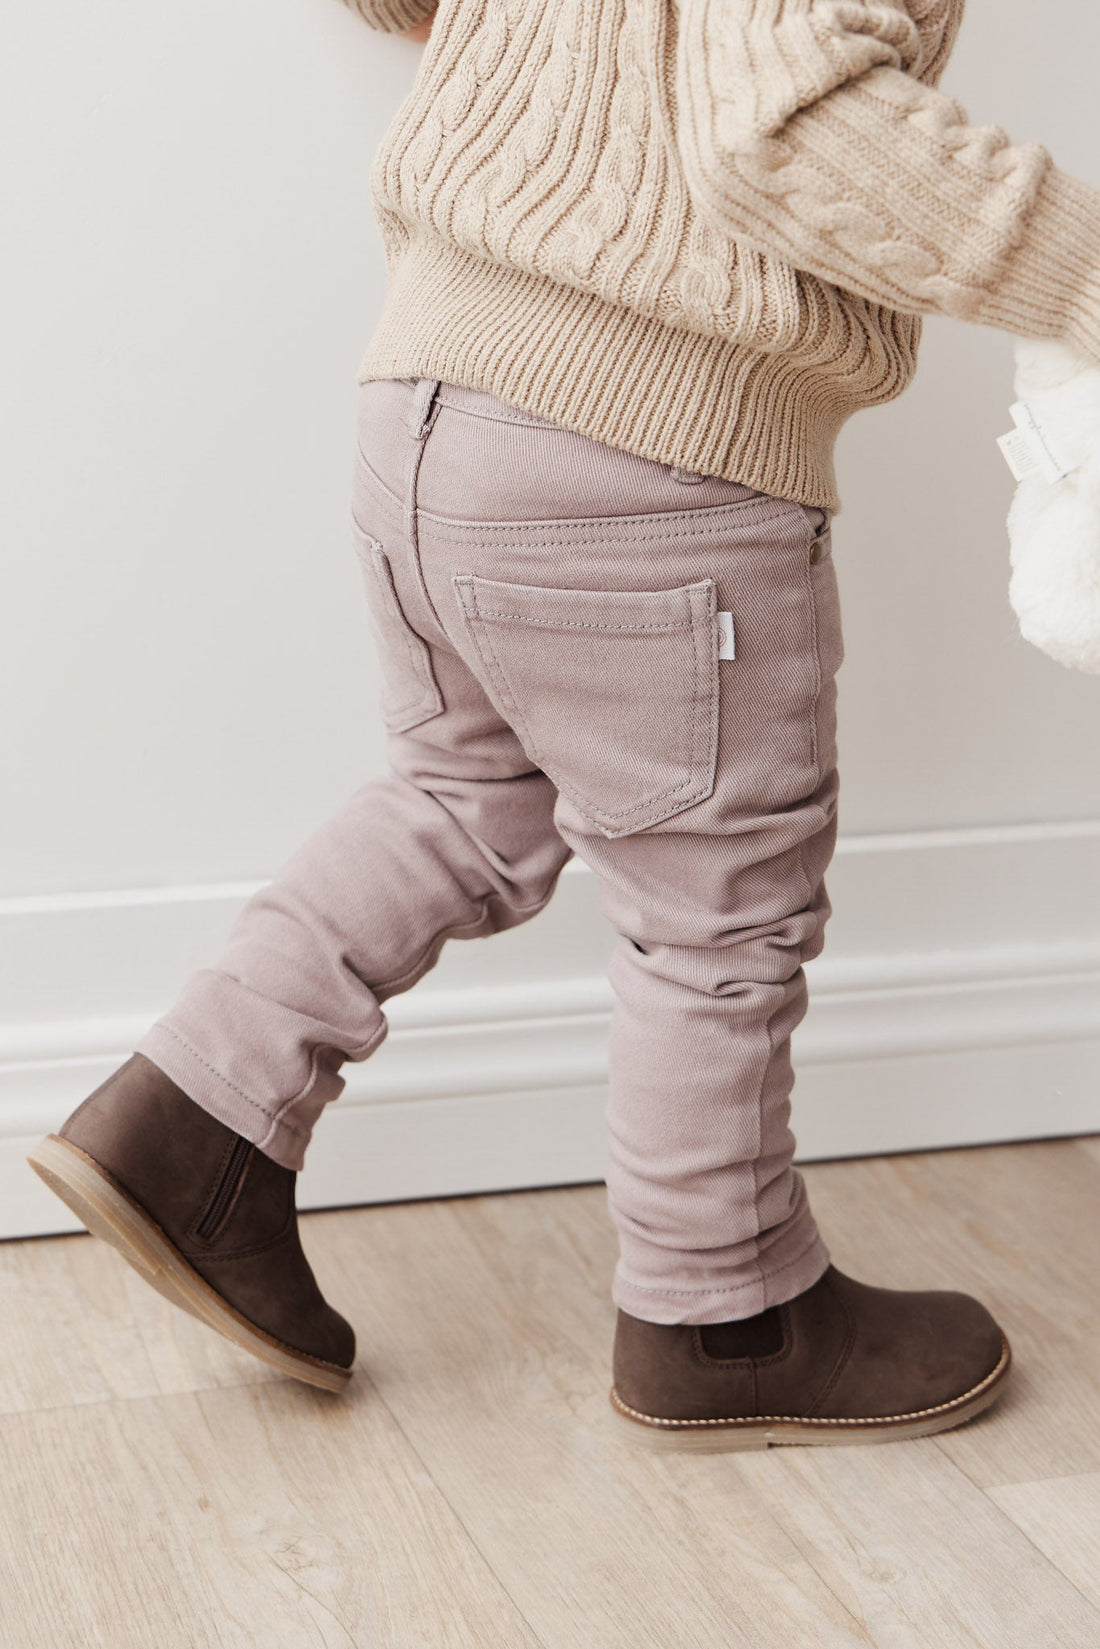 Austin Woven Pant - Cobblestone Childrens Pant from Jamie Kay USA